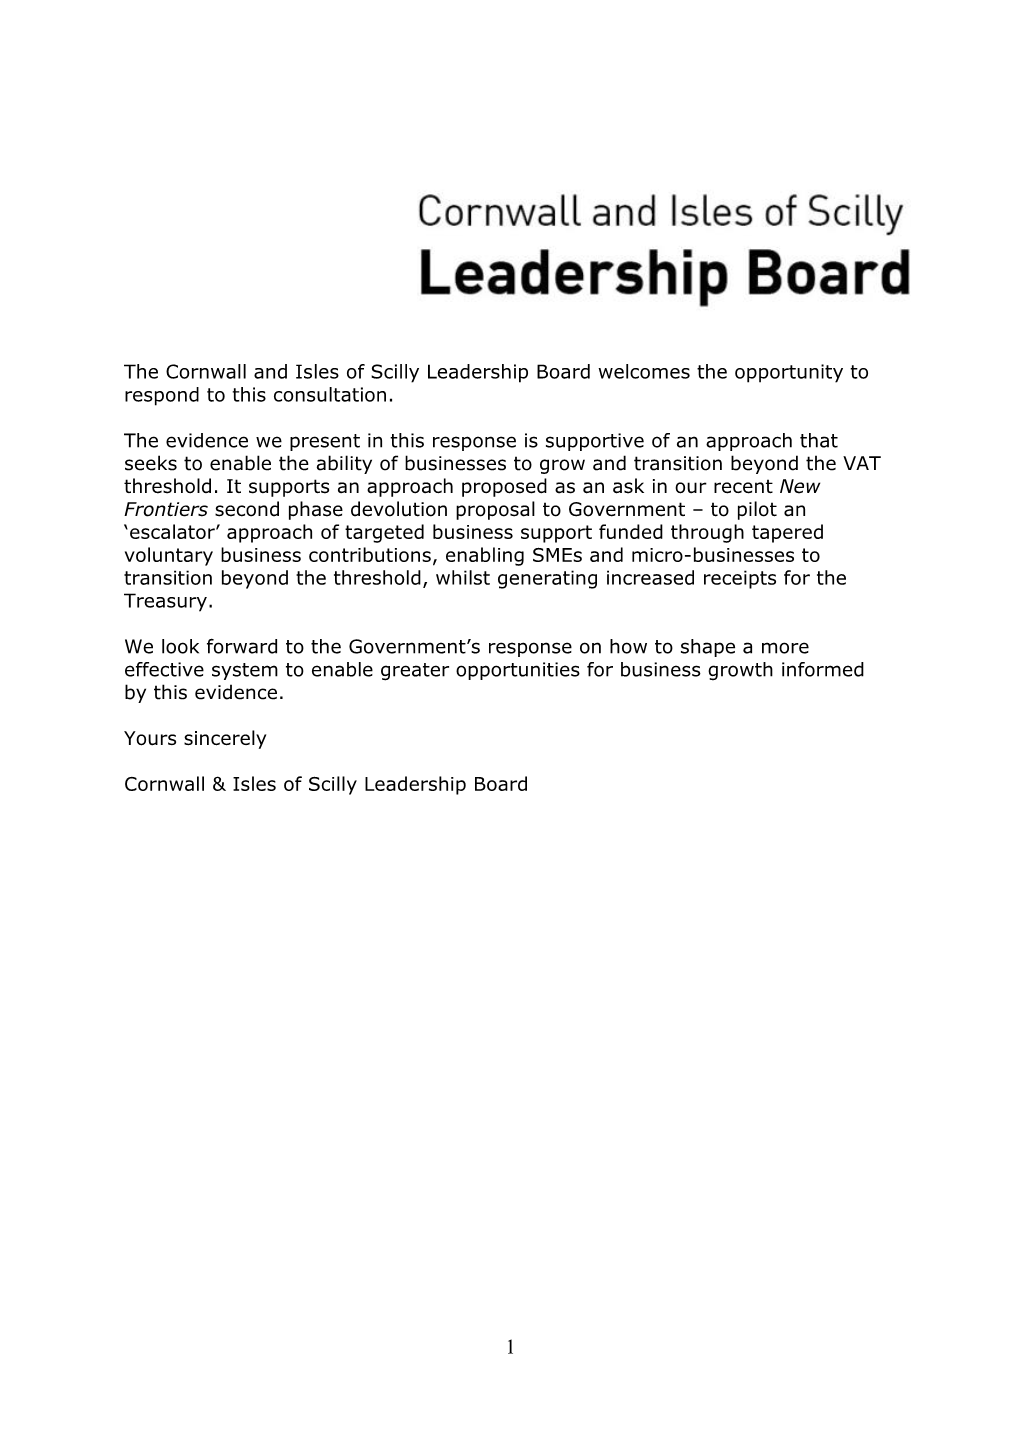 The Cornwall and Isles of Scilly Leadership Board Welcomes the Opportunity to Respond to This Consultation